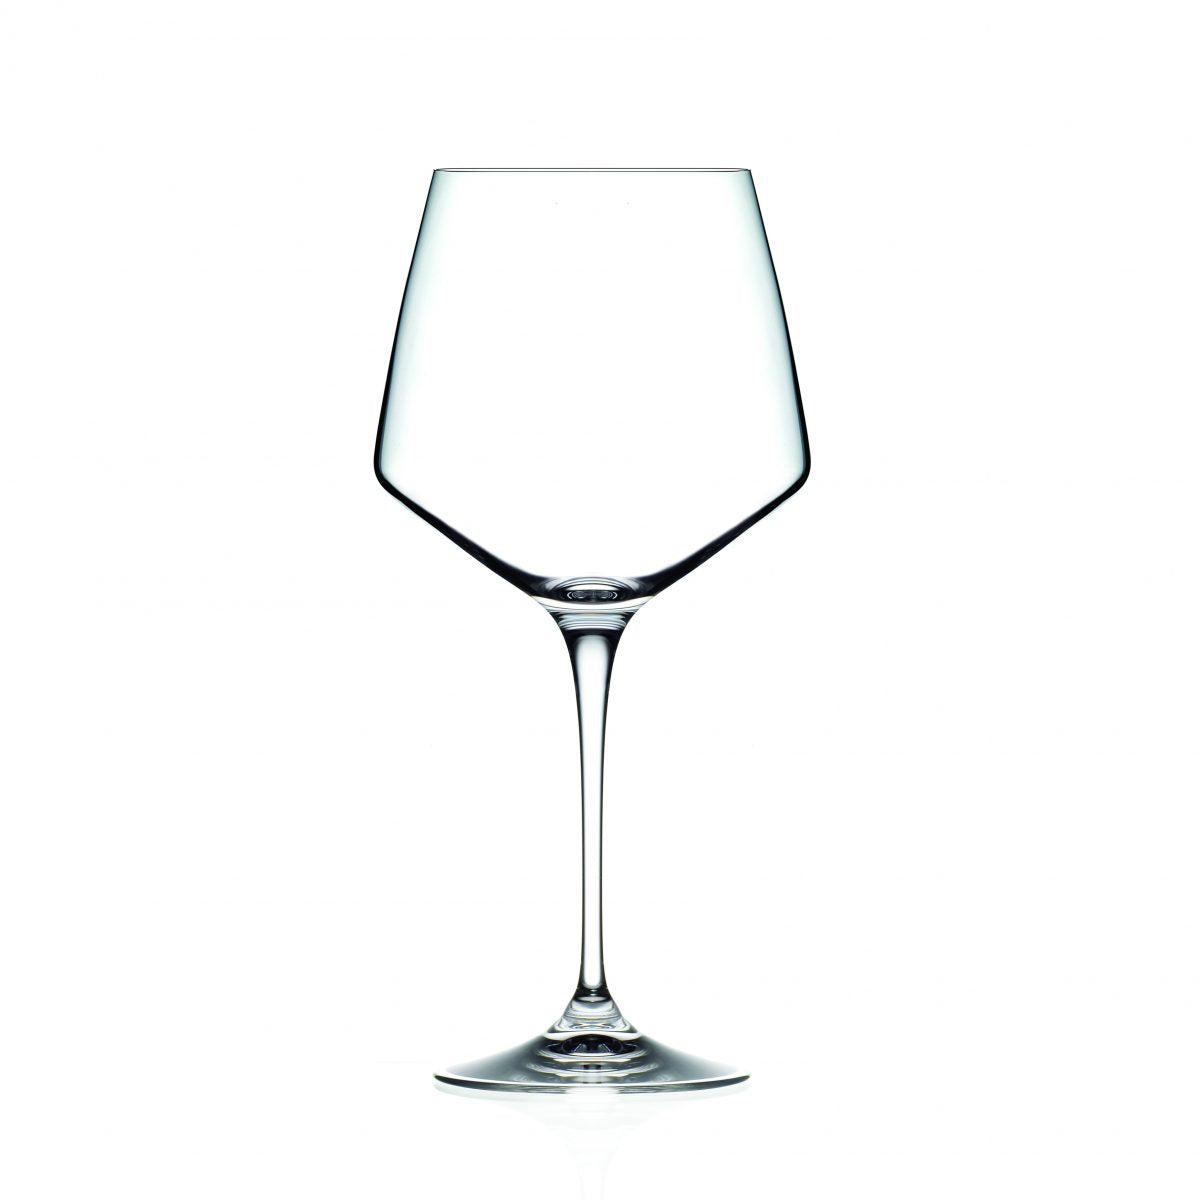 RCR (Made in Italy) Aria Crystal White Wine Goblet Glasses, 720 ml, Set of 6